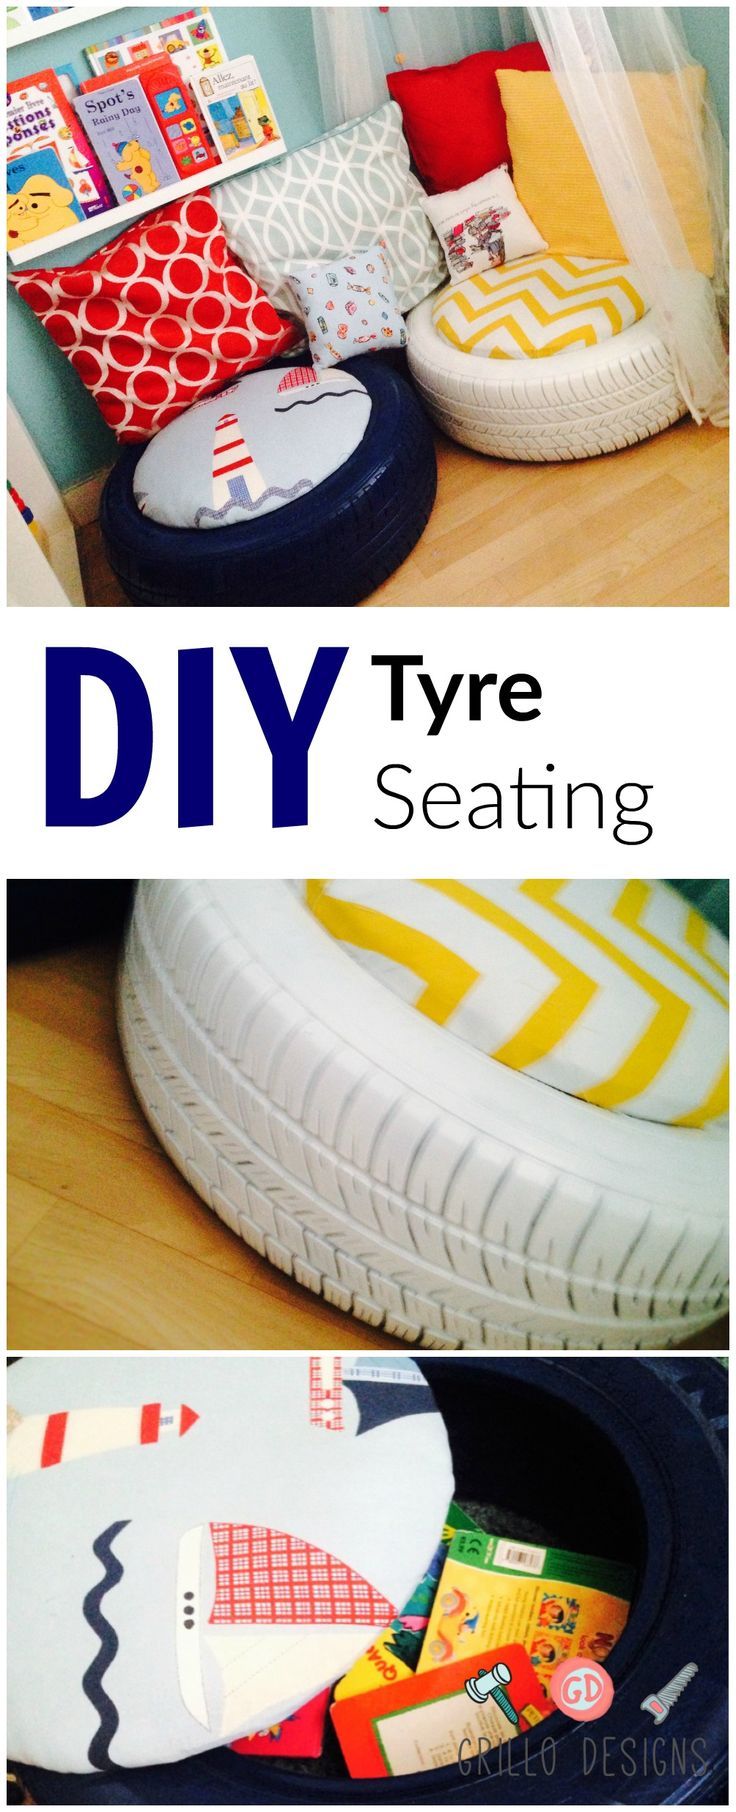 See how I recycled plain old tires into a kids' seating area!